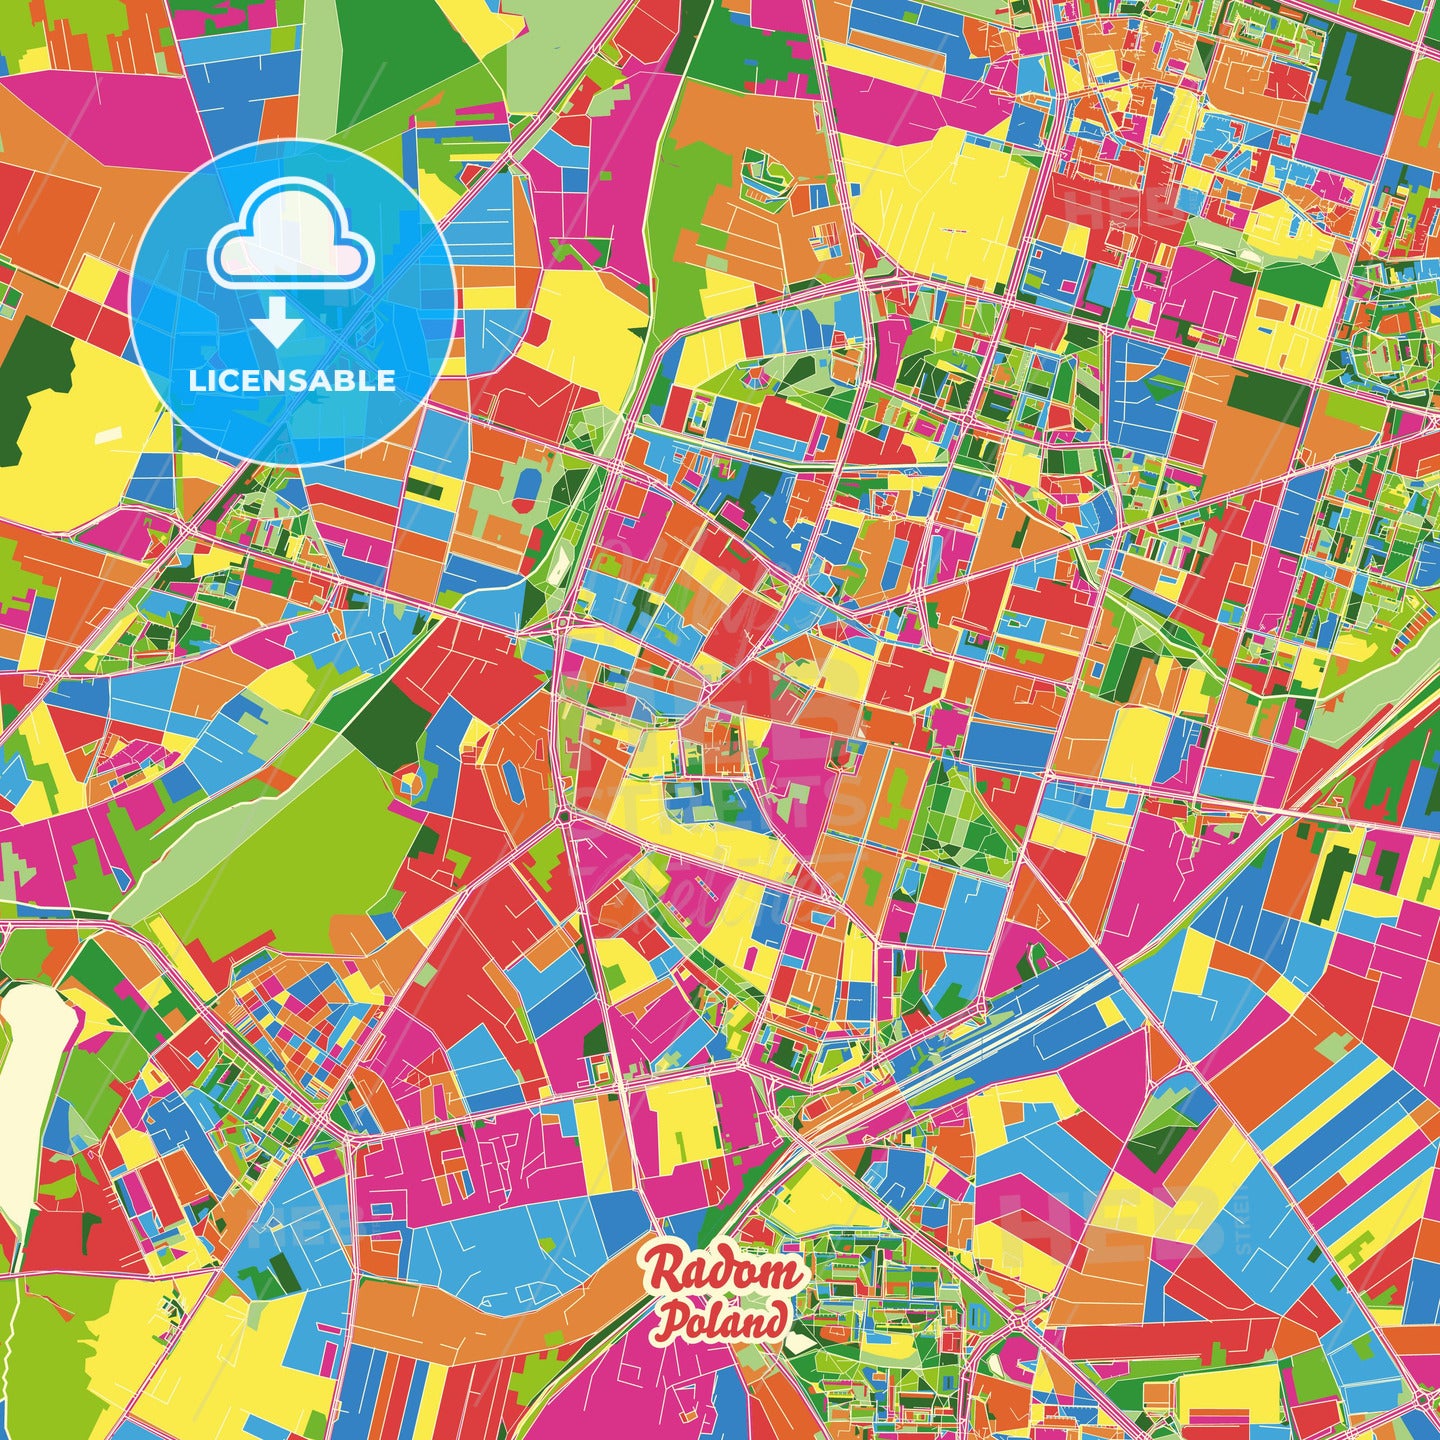 Radom, Poland Crazy Colorful Street Map Poster Template - HEBSTREITS Sketches